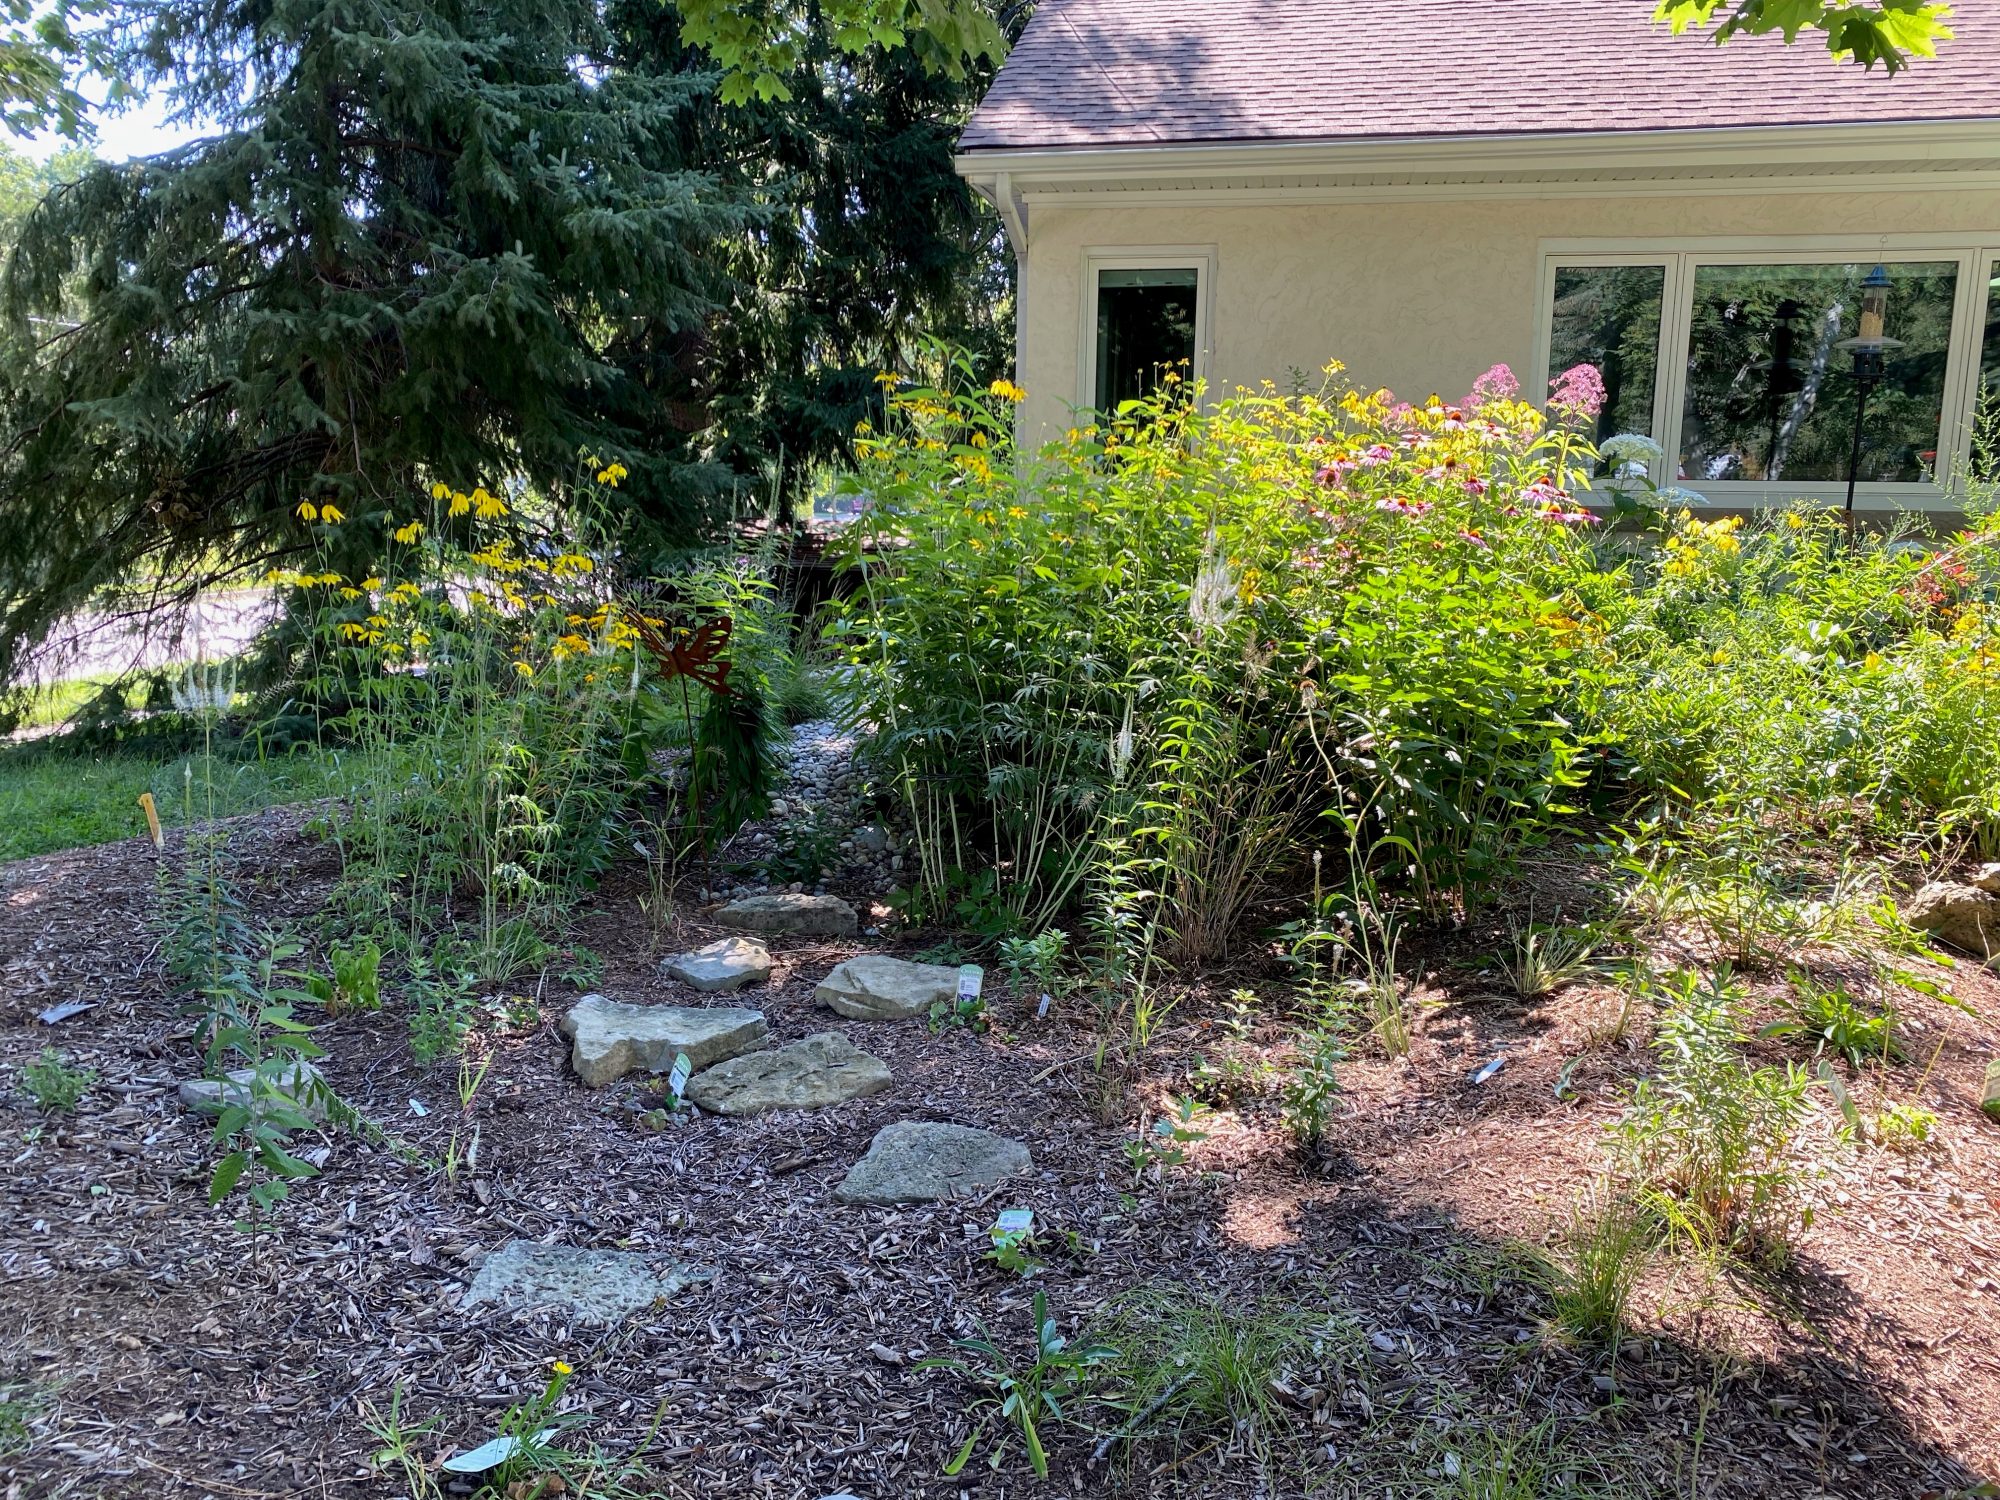 A rain garden filled with native species of flowers in front of a house.